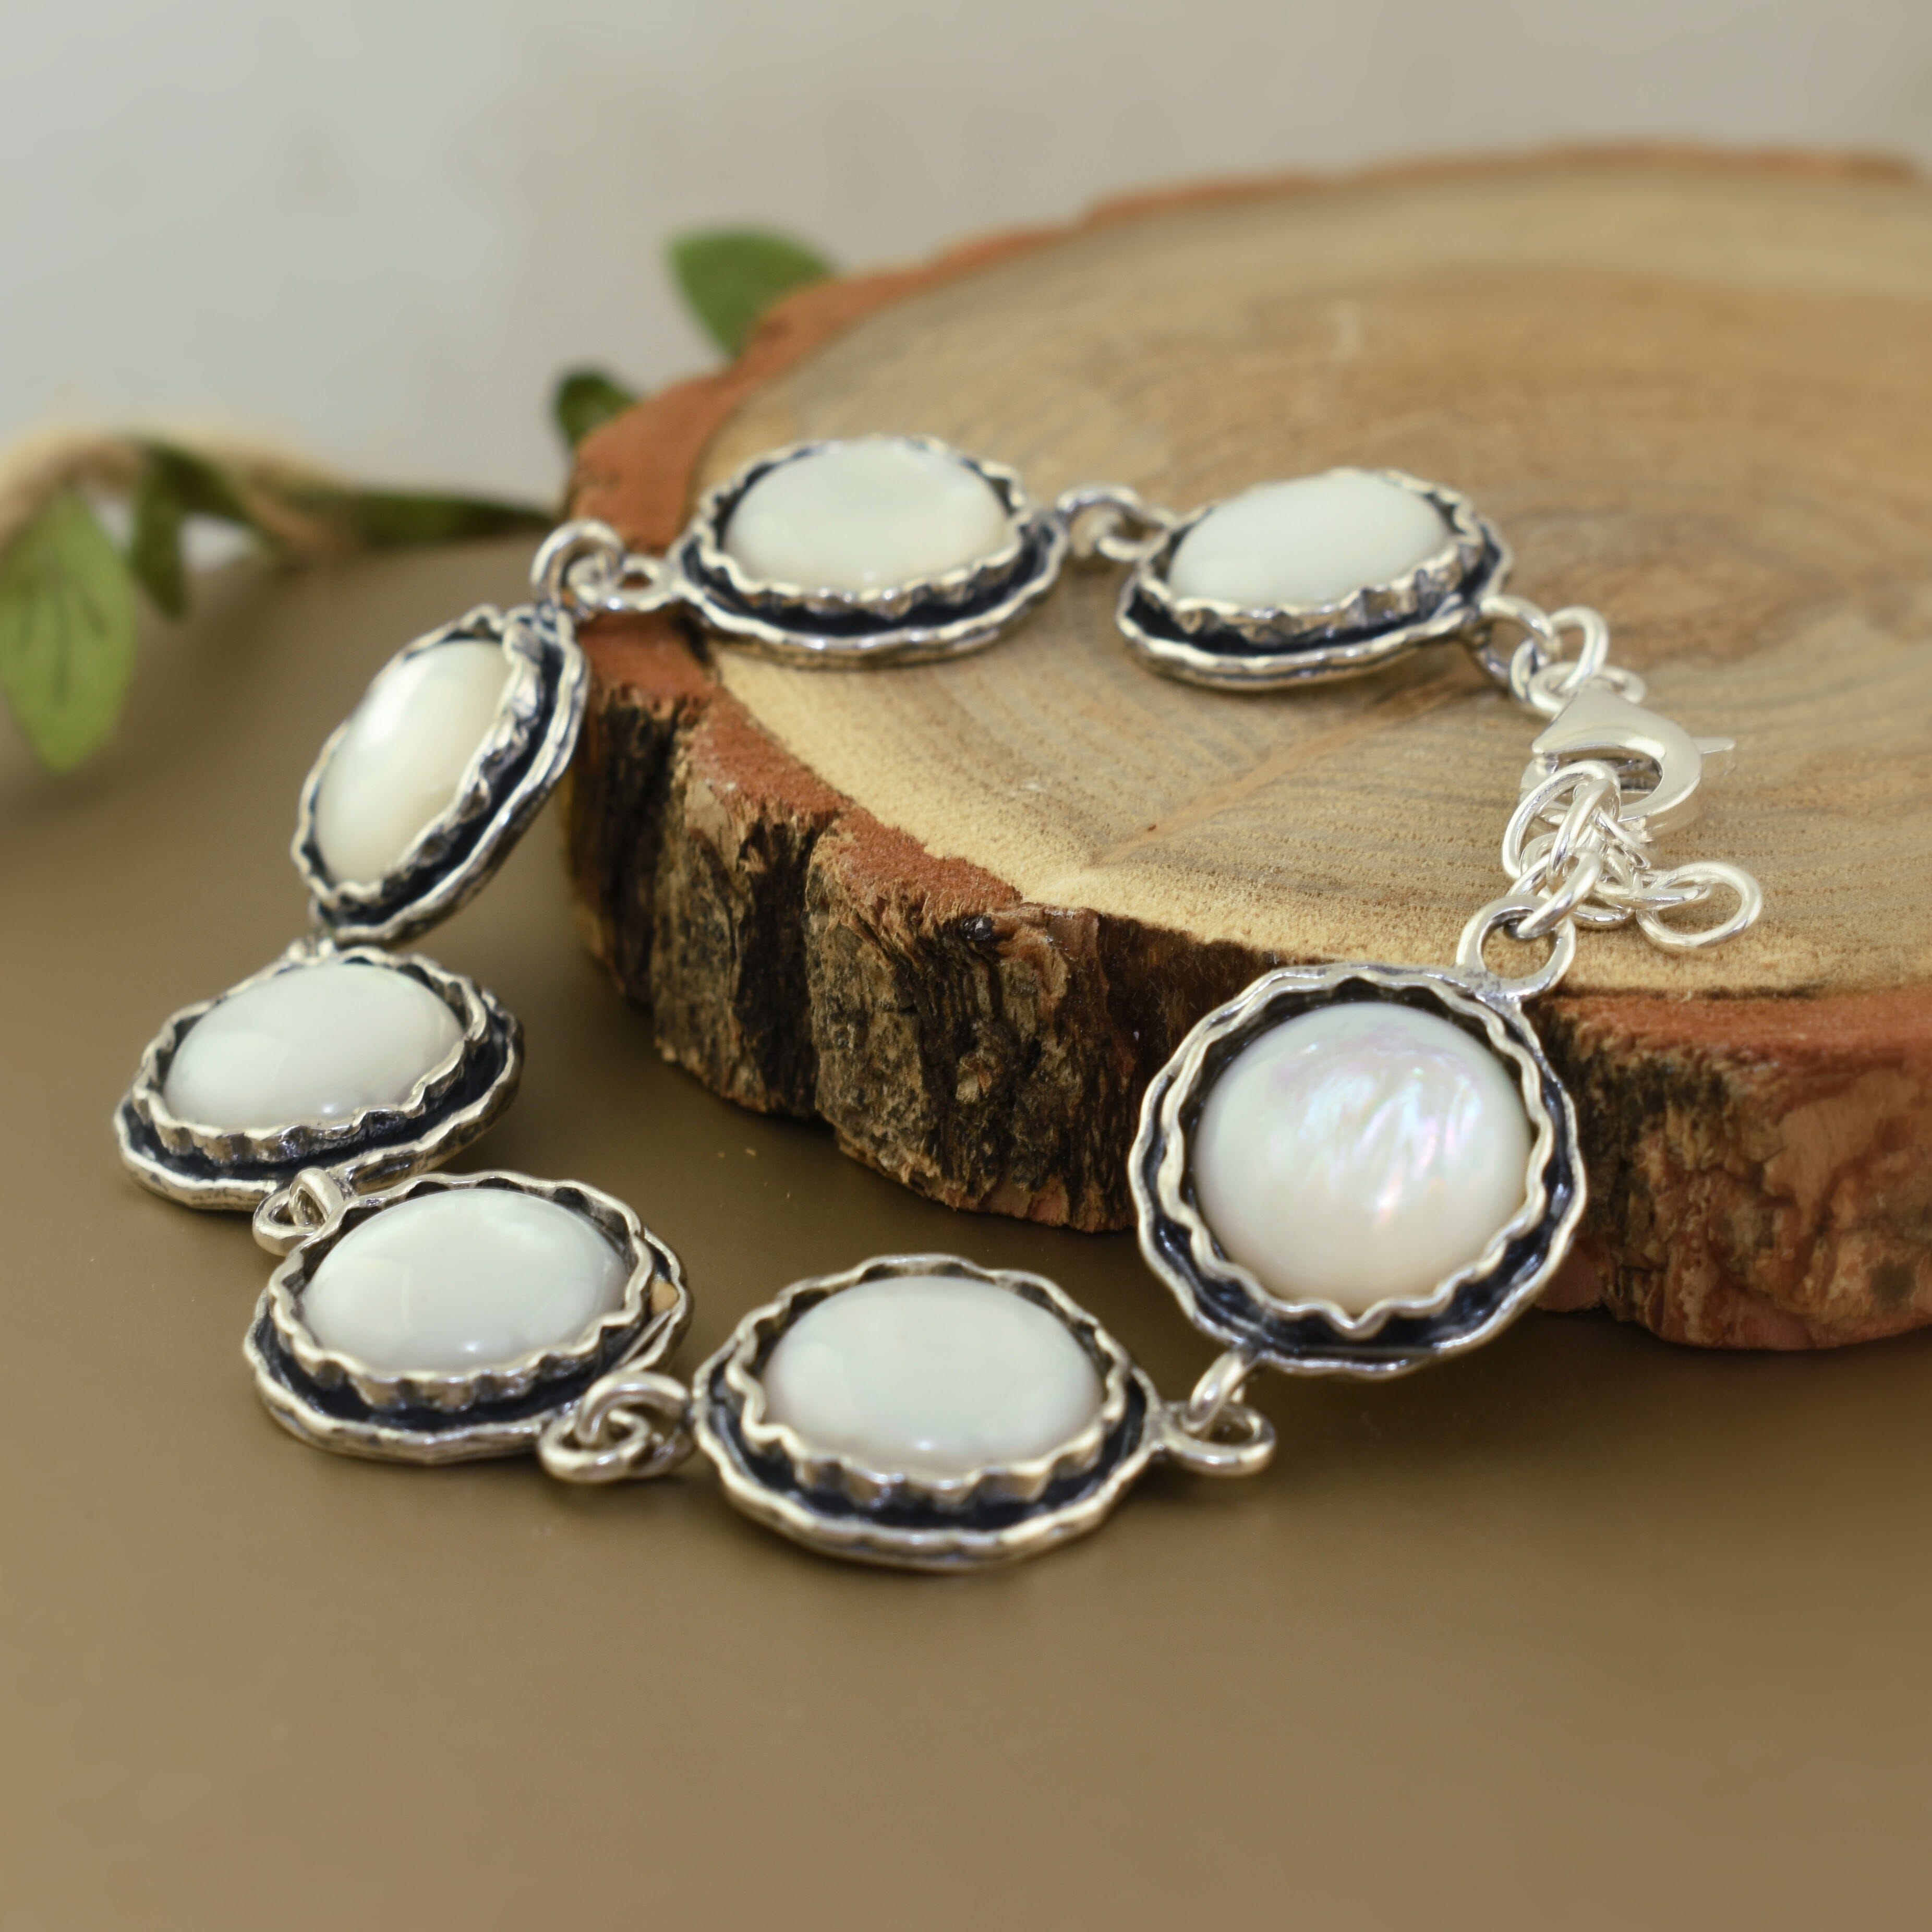 Sterling silver statement bracelet with round mother-of-pearl stones